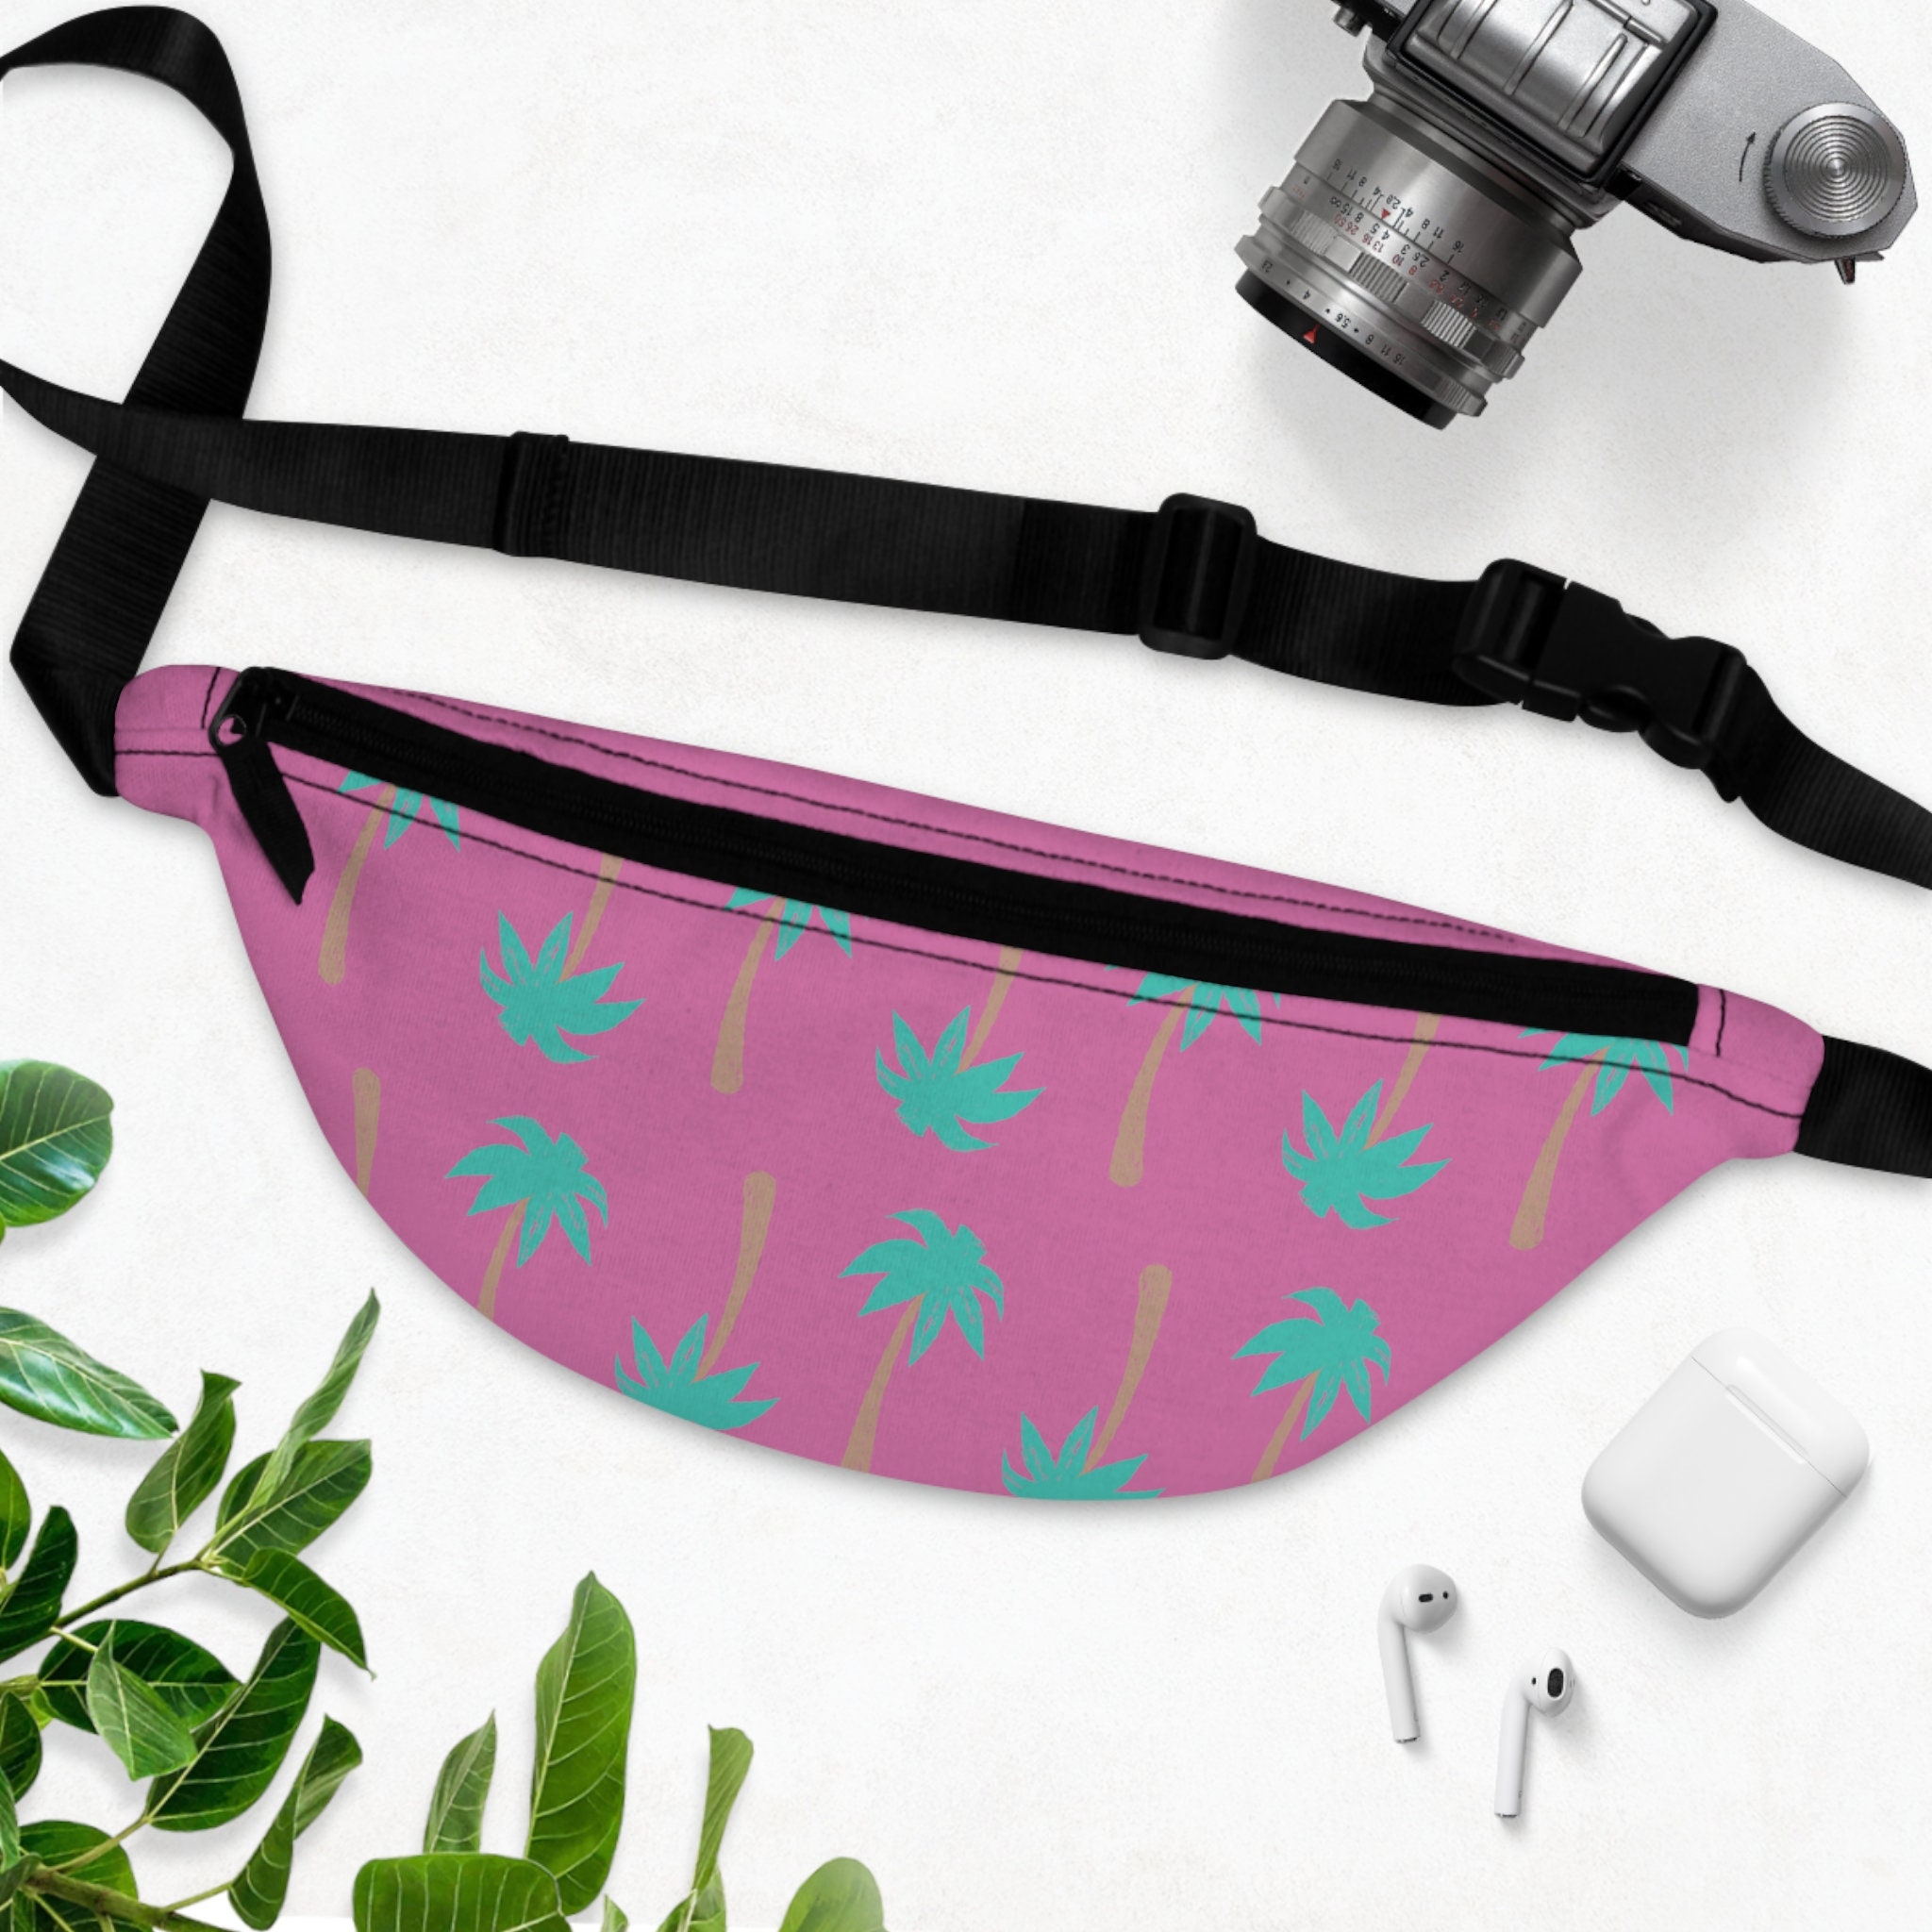  80's / 90's Fanny Pack/Supreme Fanny Pack in Retro Style/Waist  Pack for 80s Party 90s retro Party / 90s Funny Fanny Pack (Neon Pink)